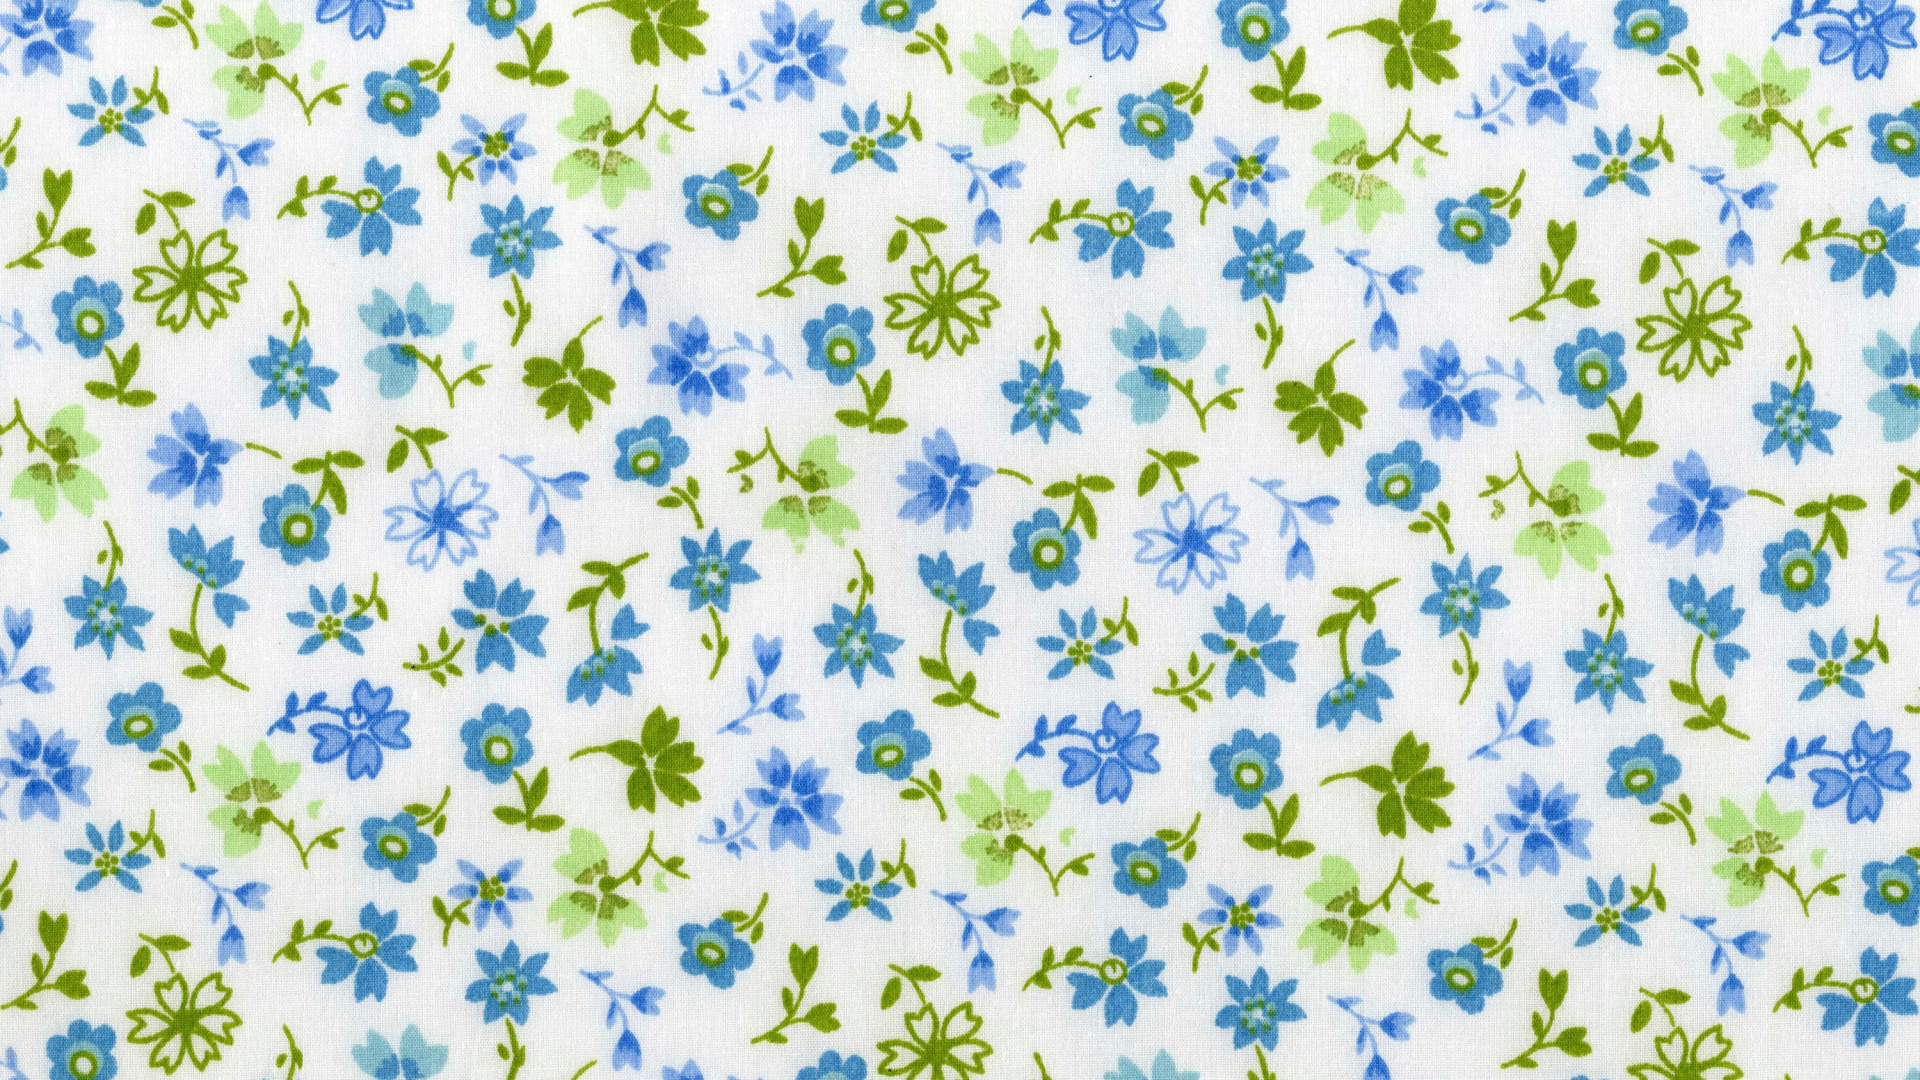 White and Blue Floral Textile. Wallpaper in 1920x1080 Resolution